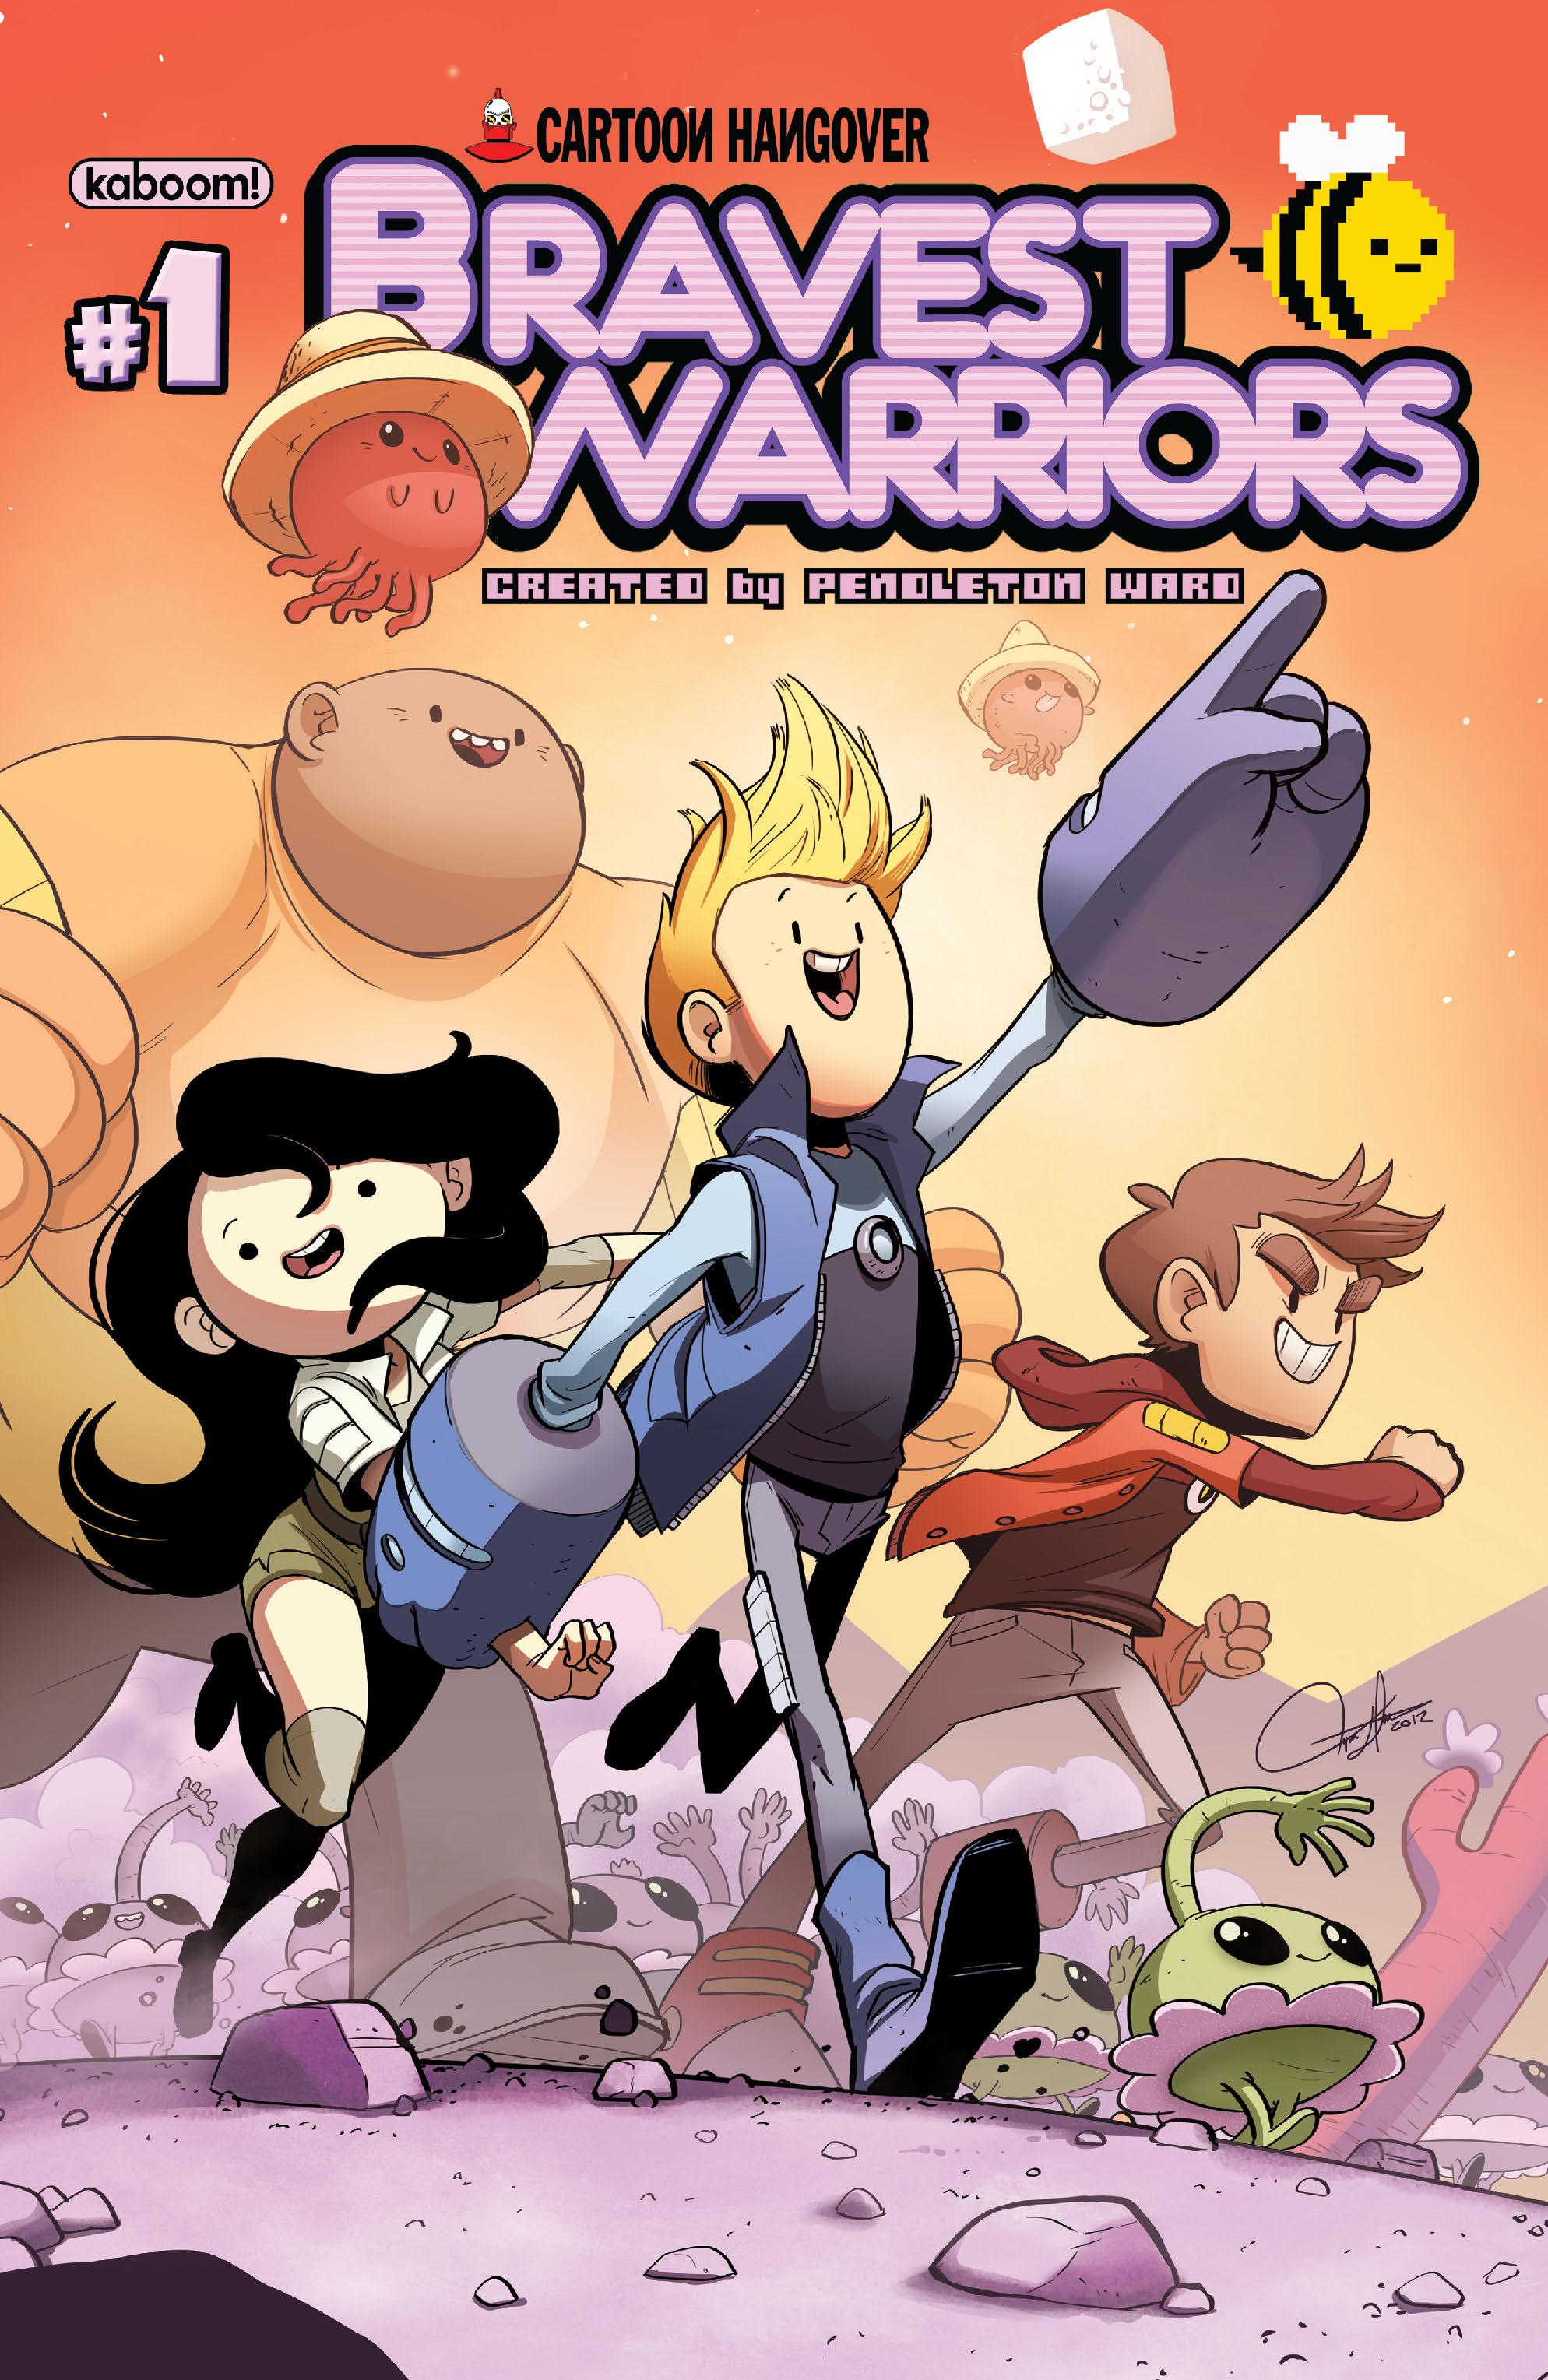 Bravest Warriors #2 by Joey Comeau